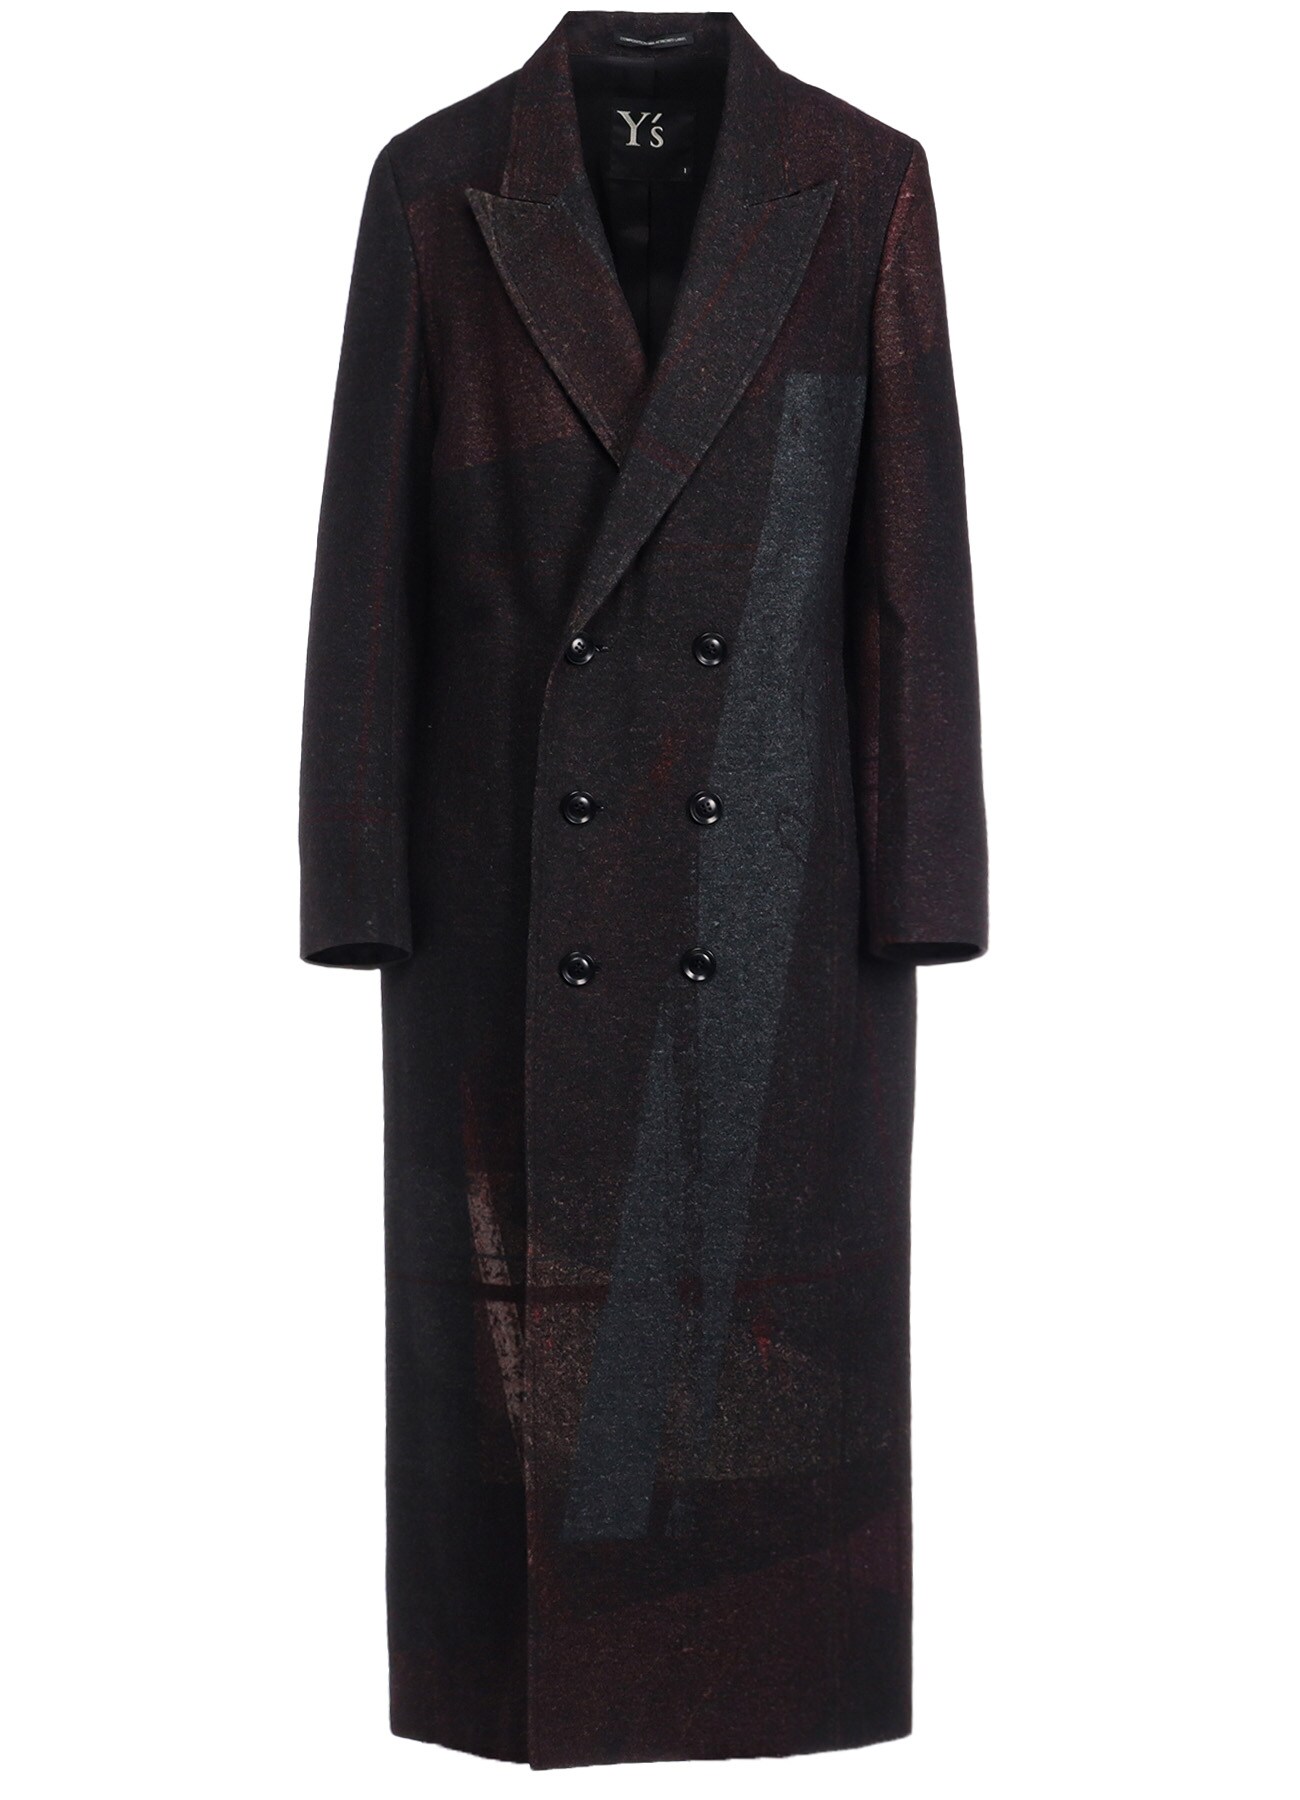 【7/26 12:00(JTS) Release】RAISED C/W TWILL PEALED CHECK PT W FRONT LONG COAT